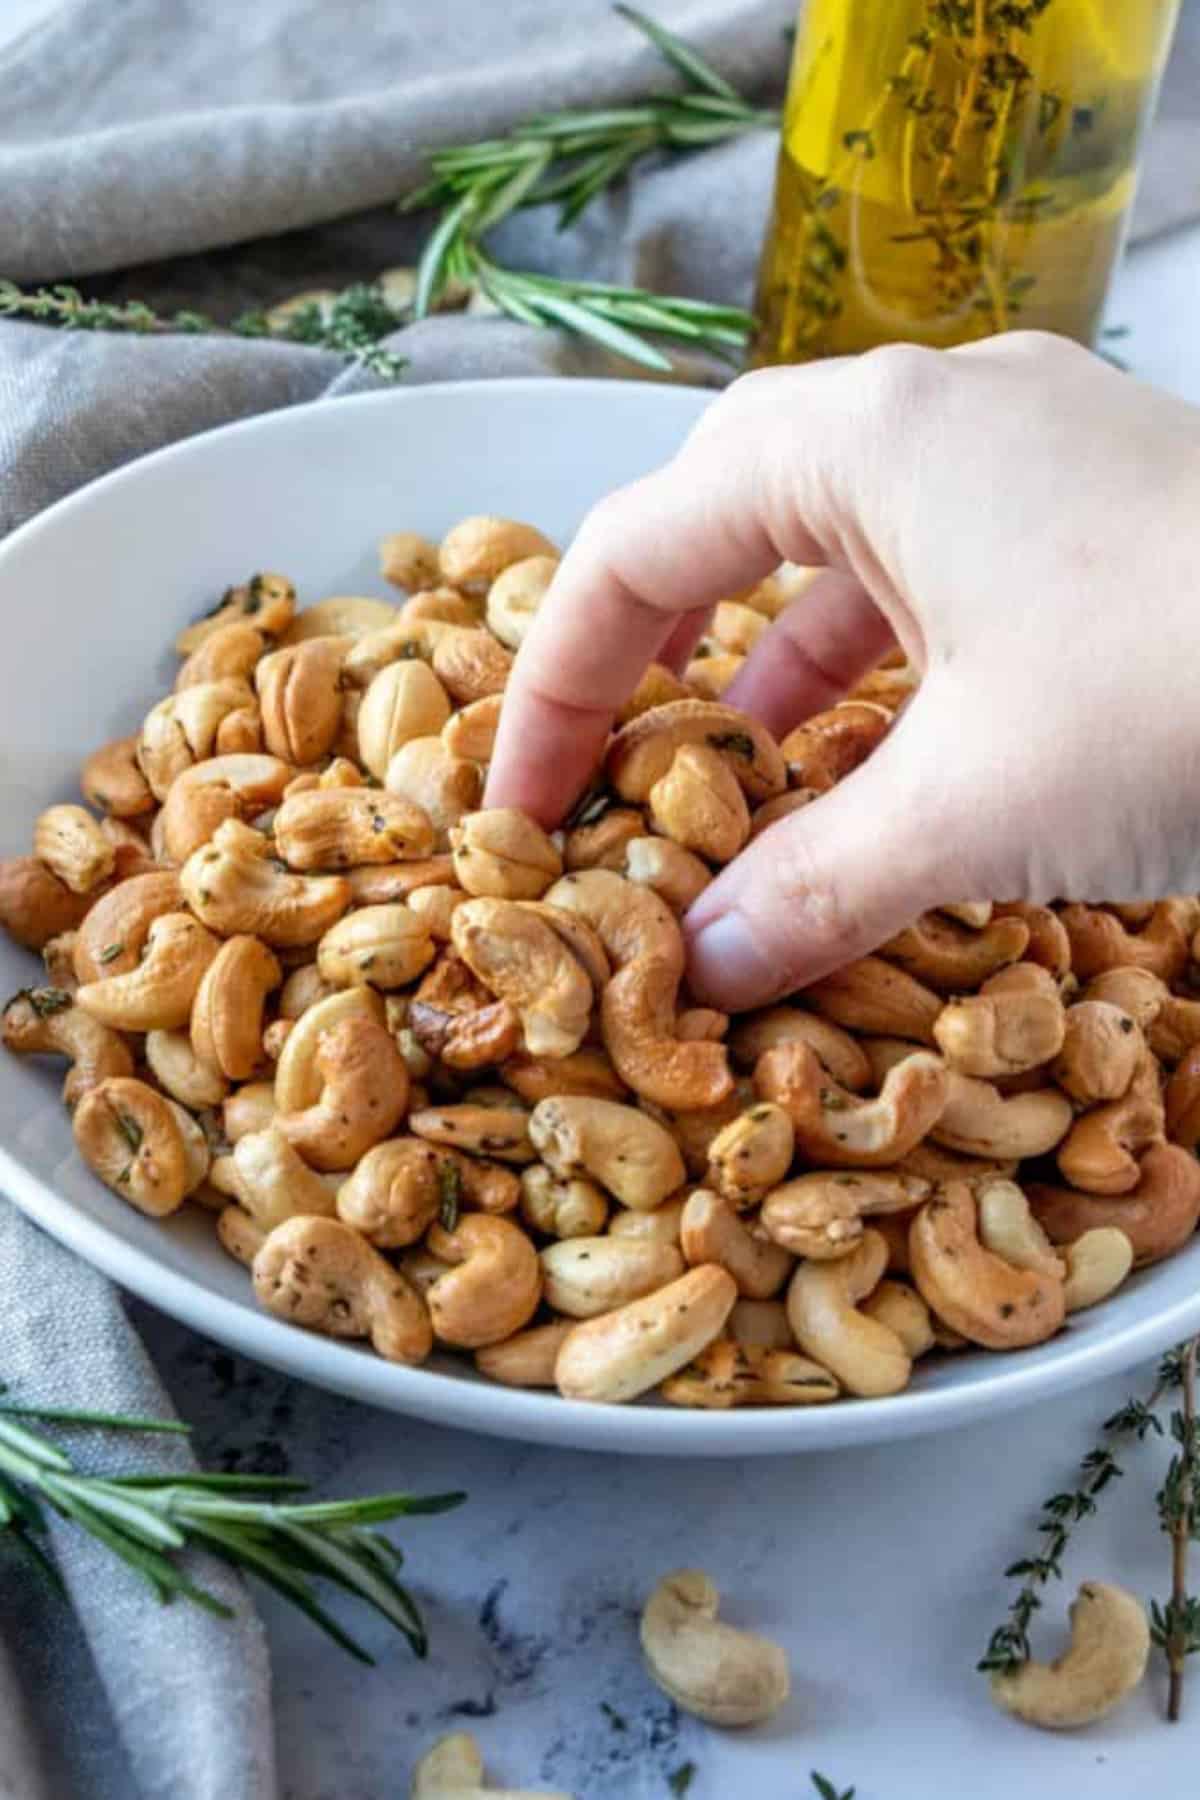 A hand grabbing herb roasted cashews from a bowl